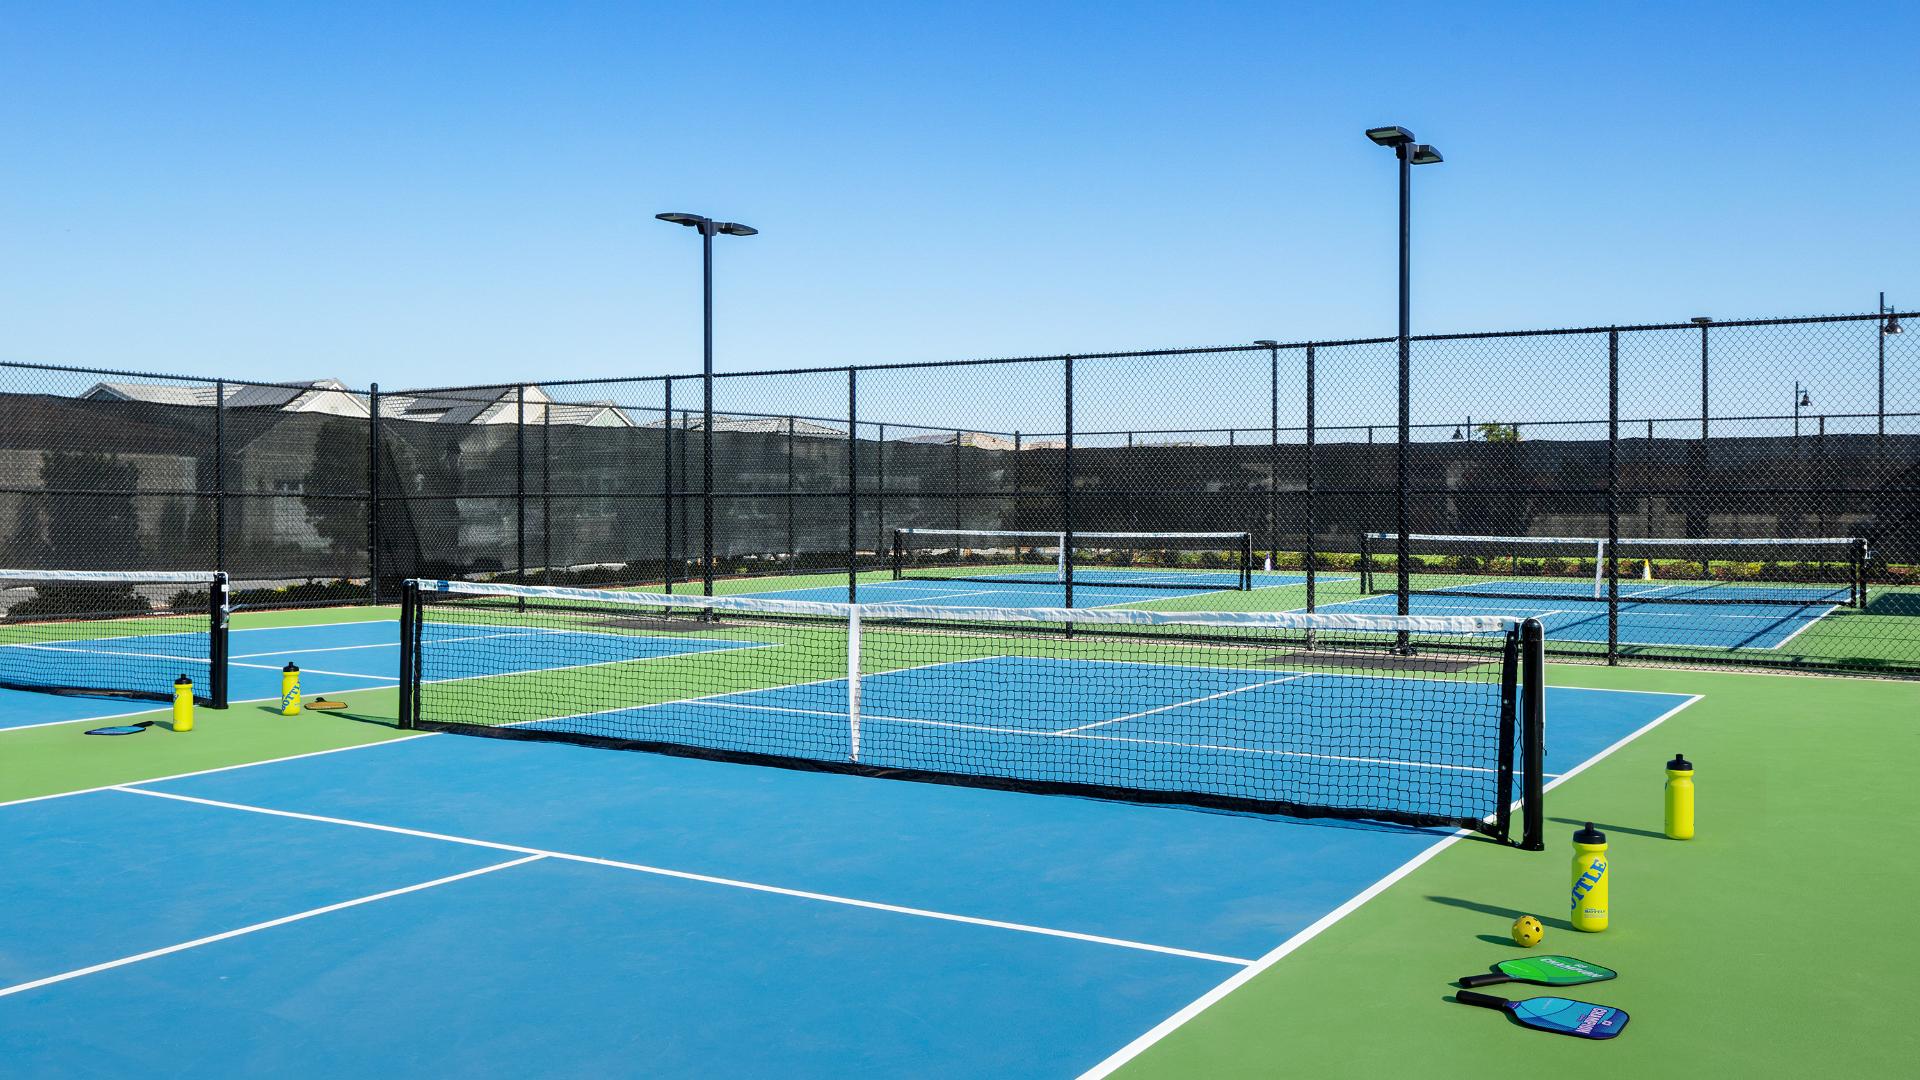 Seven pickleball courts for games and tournaments